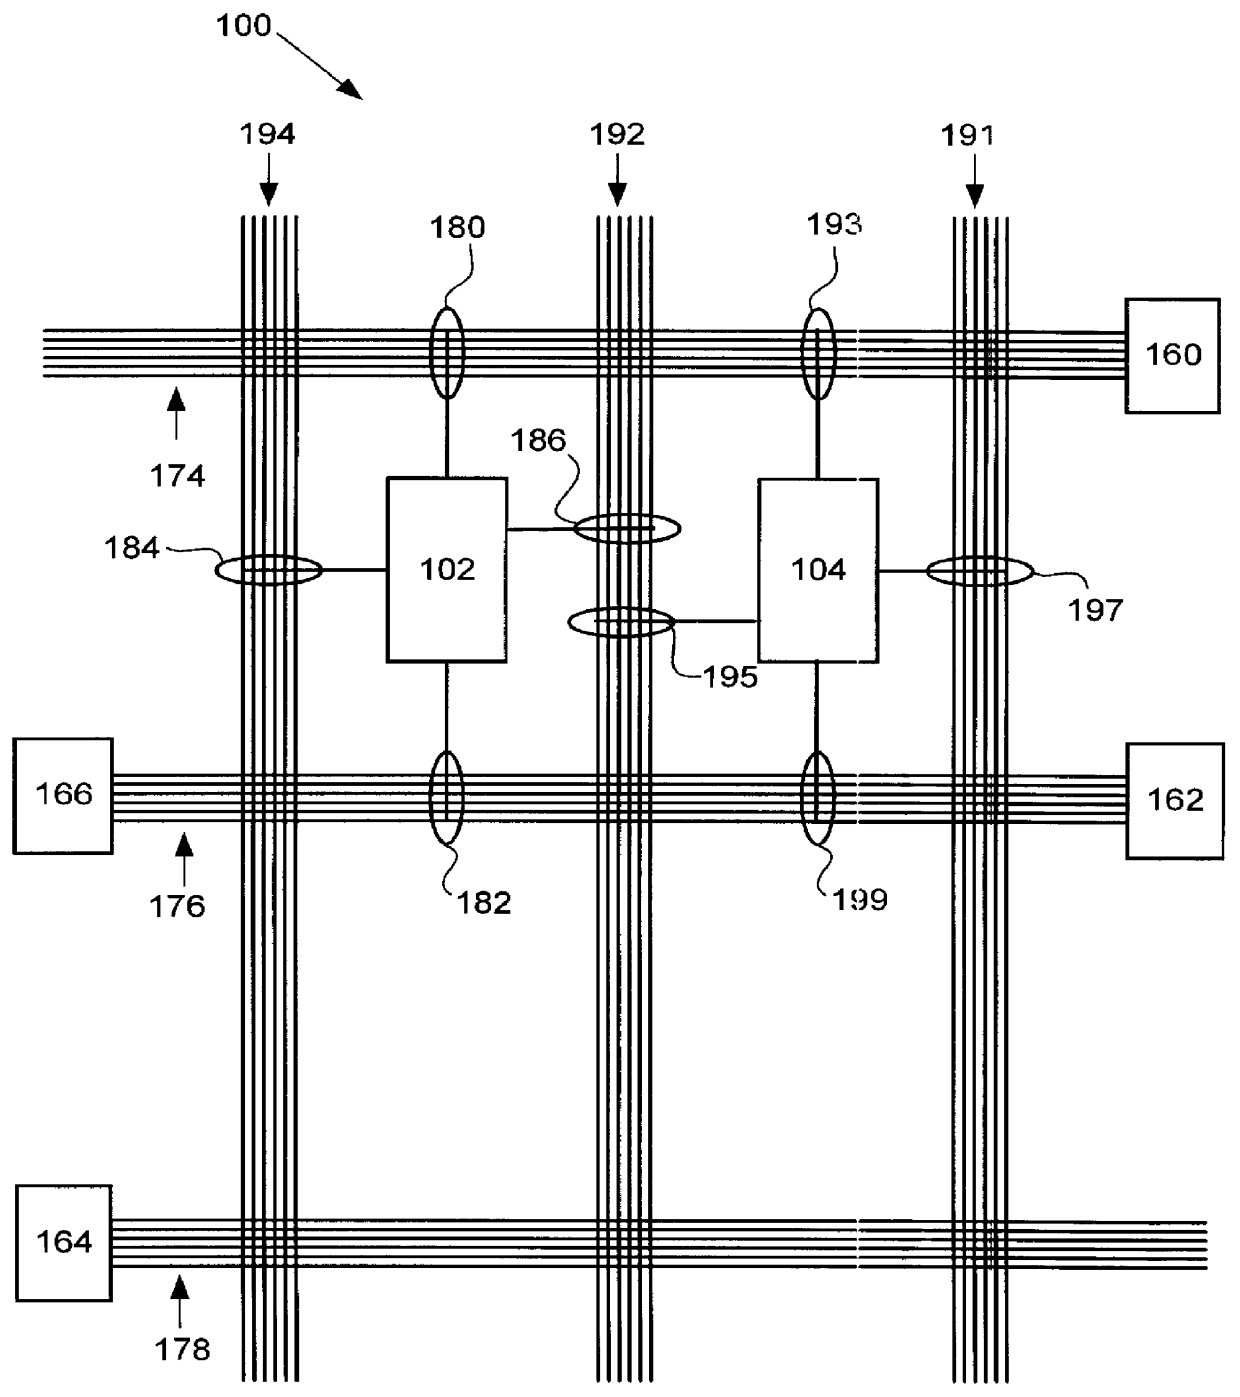 Programmable logic device architecture incorporating a dedicated cross-bar switch